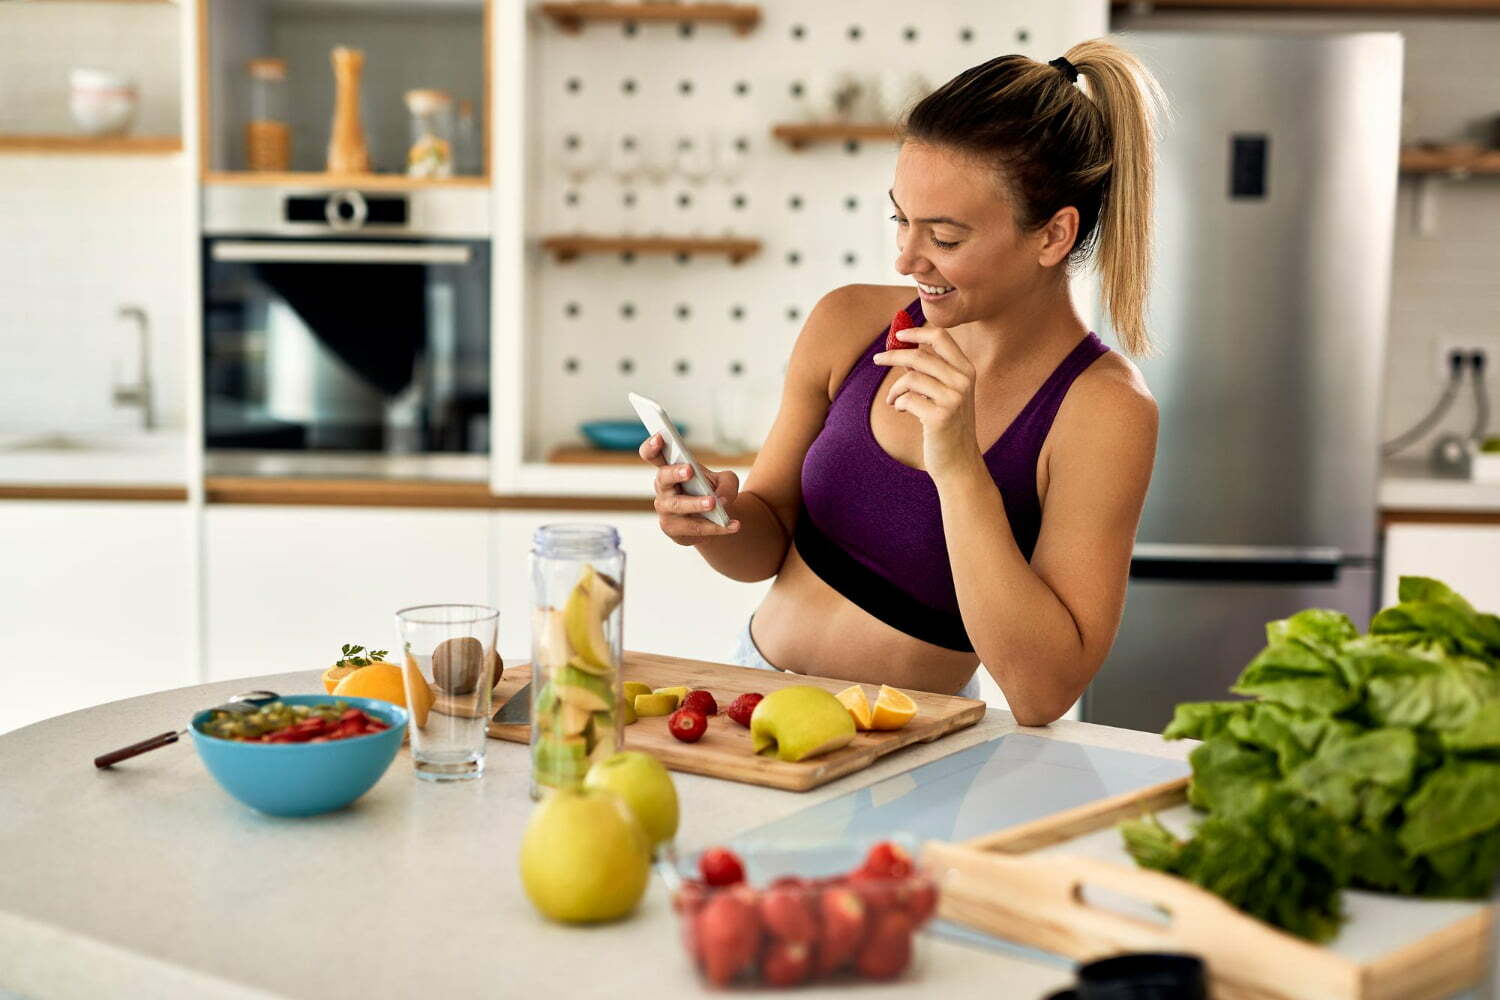 woman in exercise clothes, eating fruits to lose weight, while looking at her cell phone / Midlife crisis / muscle mass